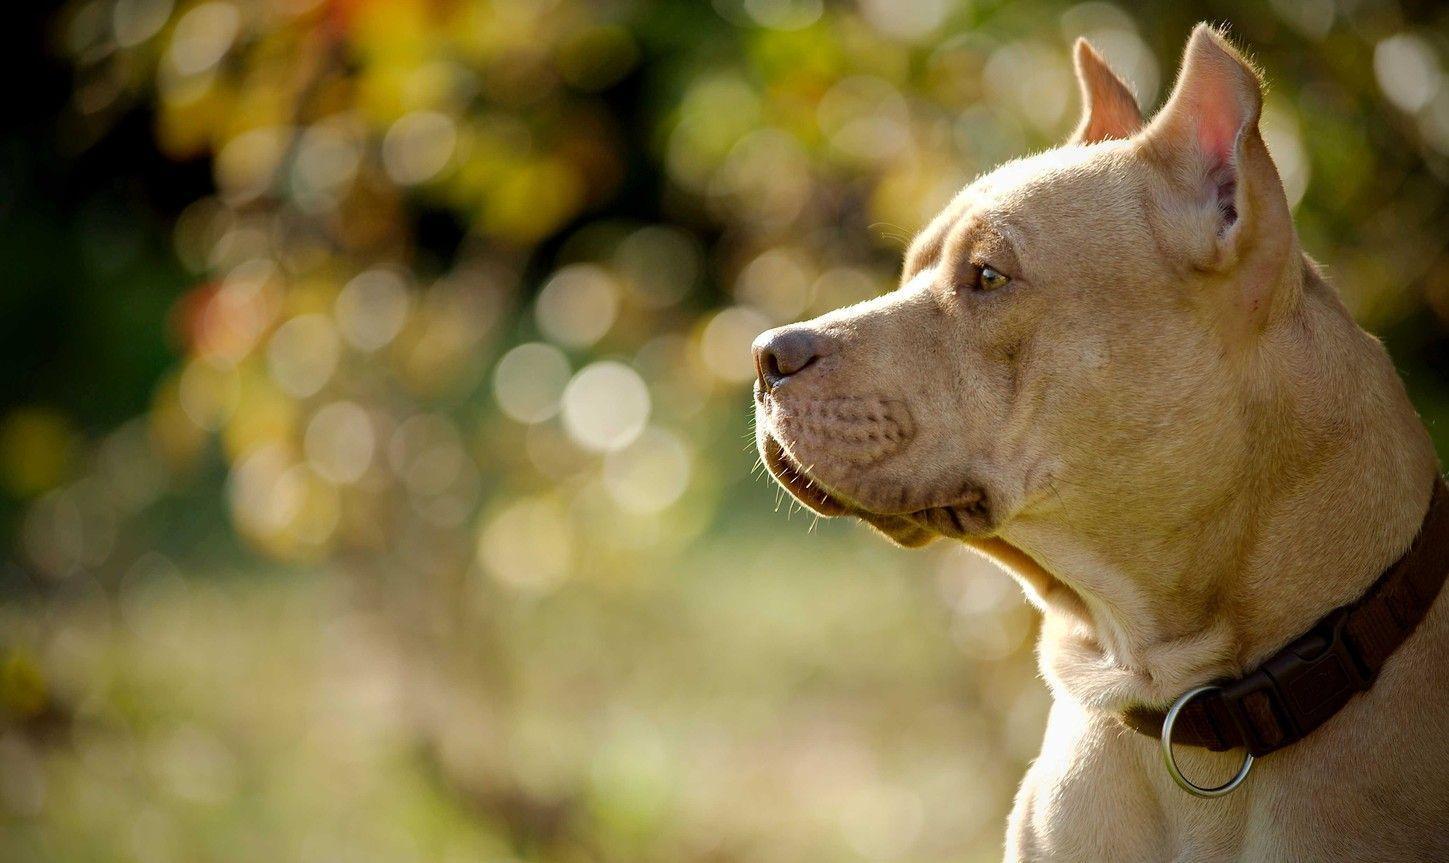 Wallpapers For > Cute Pitbull Dog Wallpapers